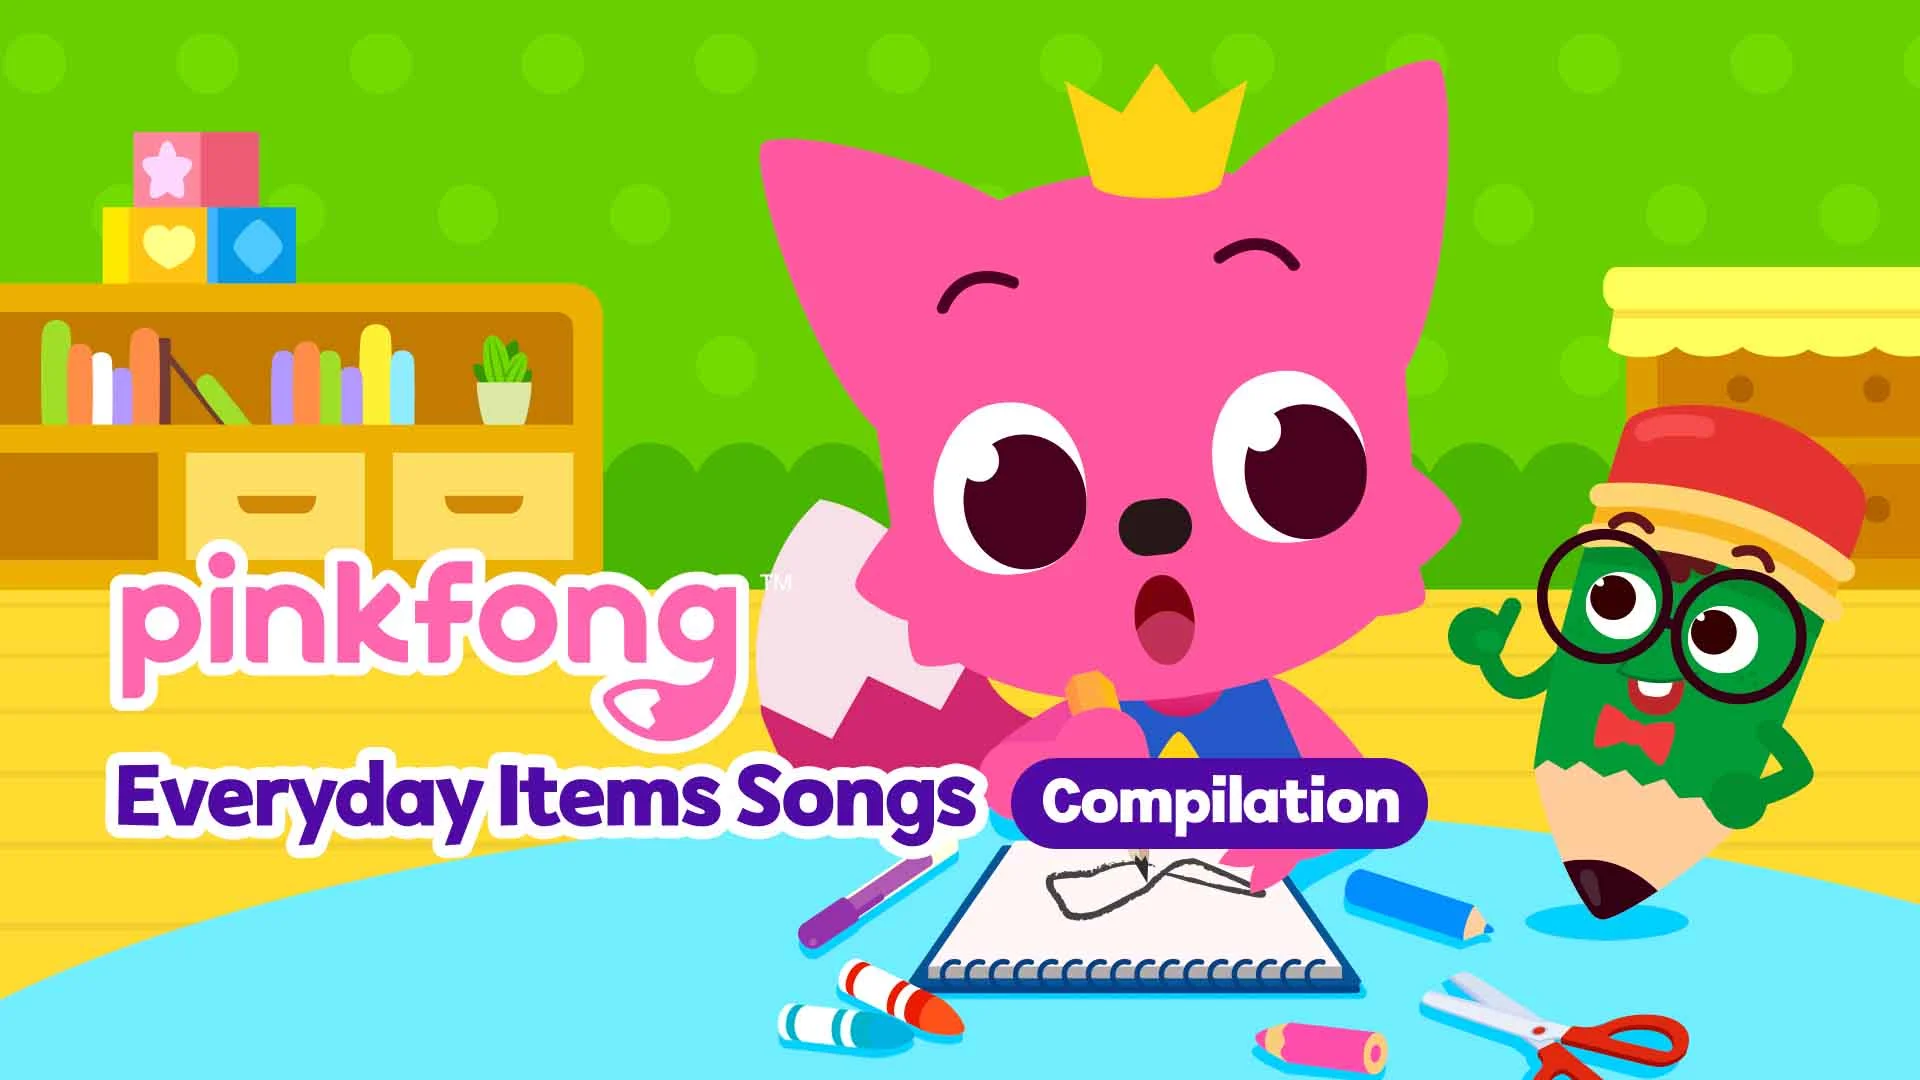 Pinkfong Everyday Item Songs Compilation